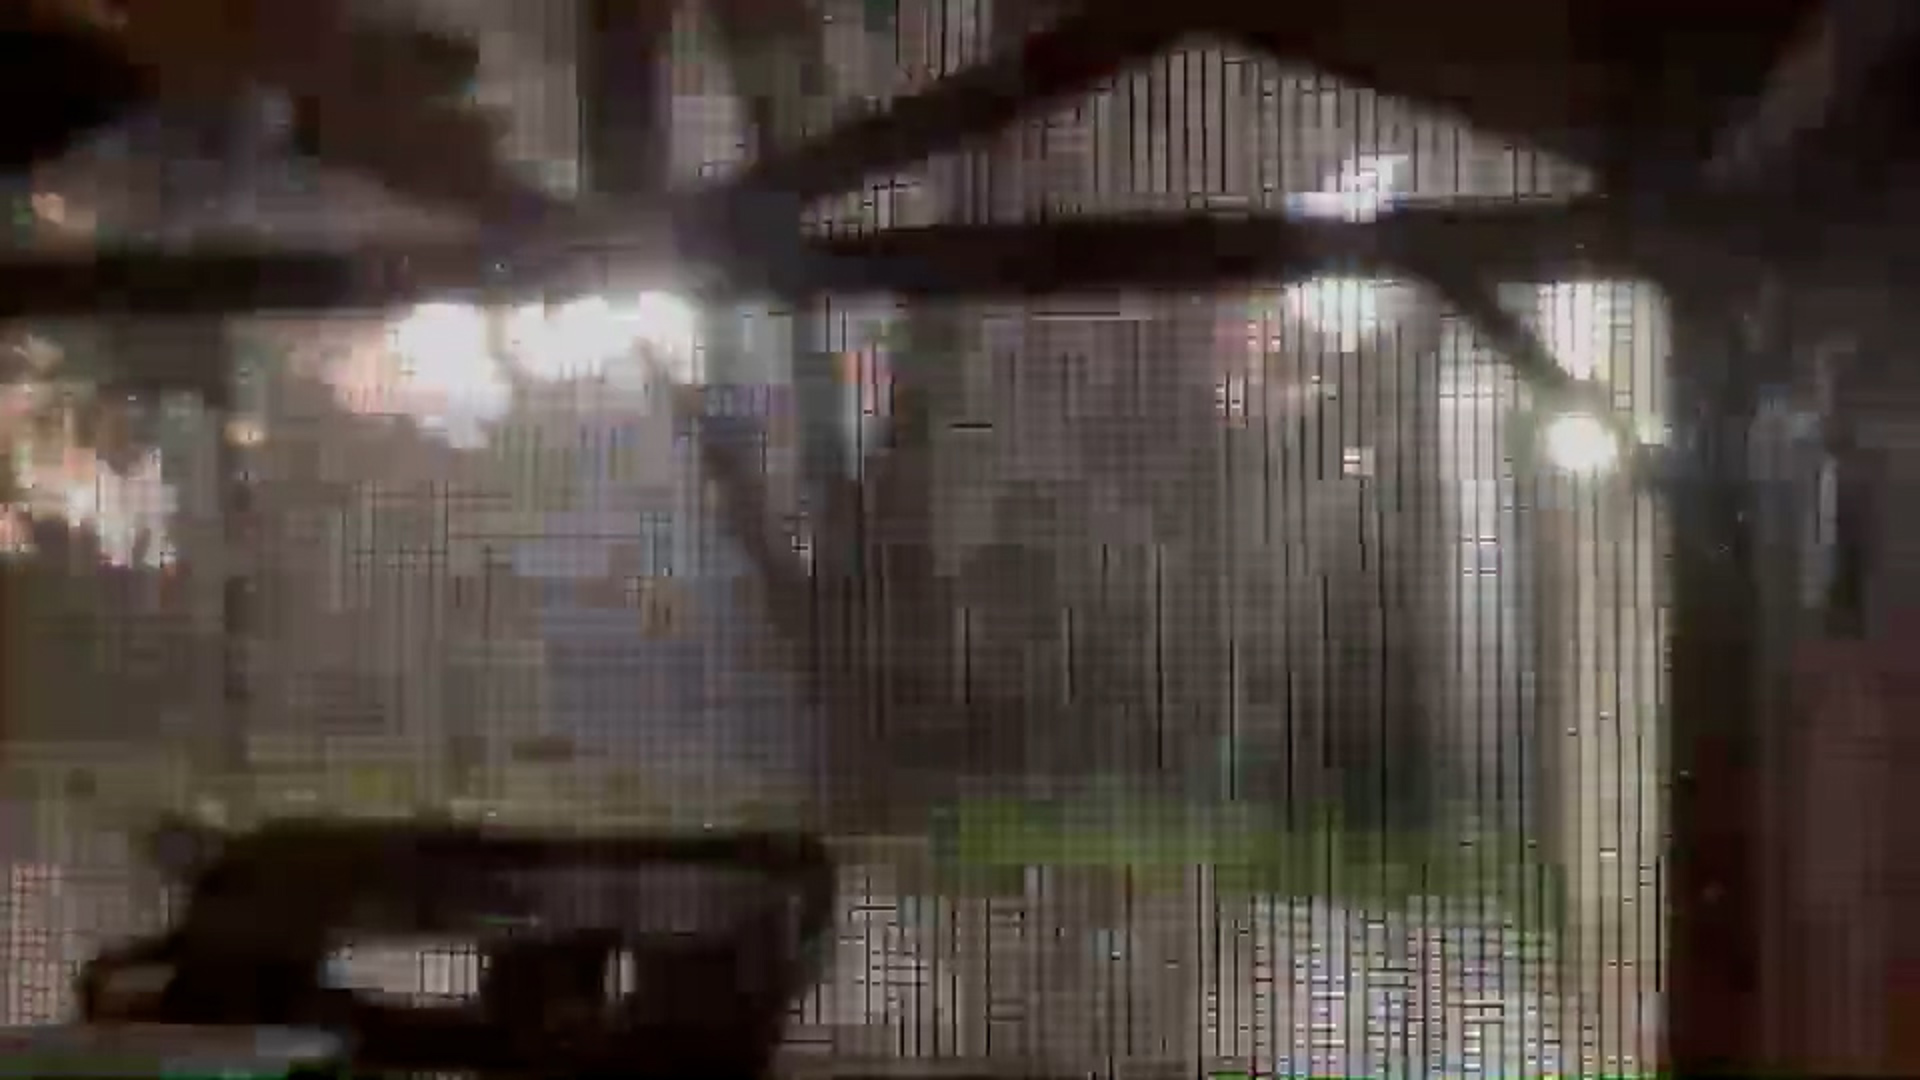 A viewer, Lauren Campagna Ragan, sent us this video of their power lines during a severe storm in Dallas early Tuesday.